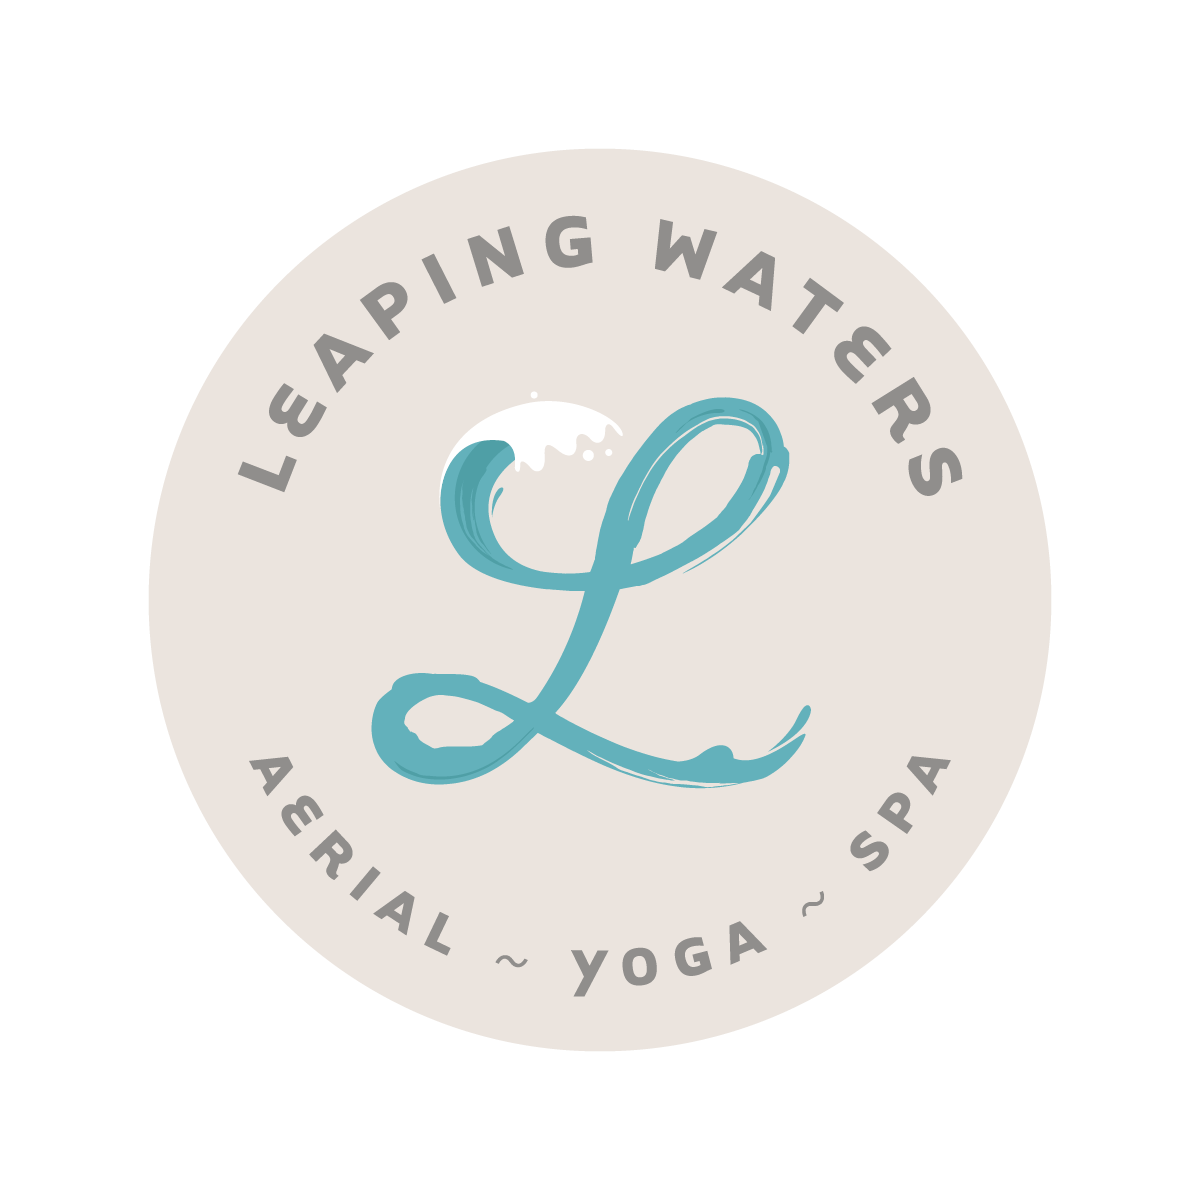 Leaping Waters Yoga